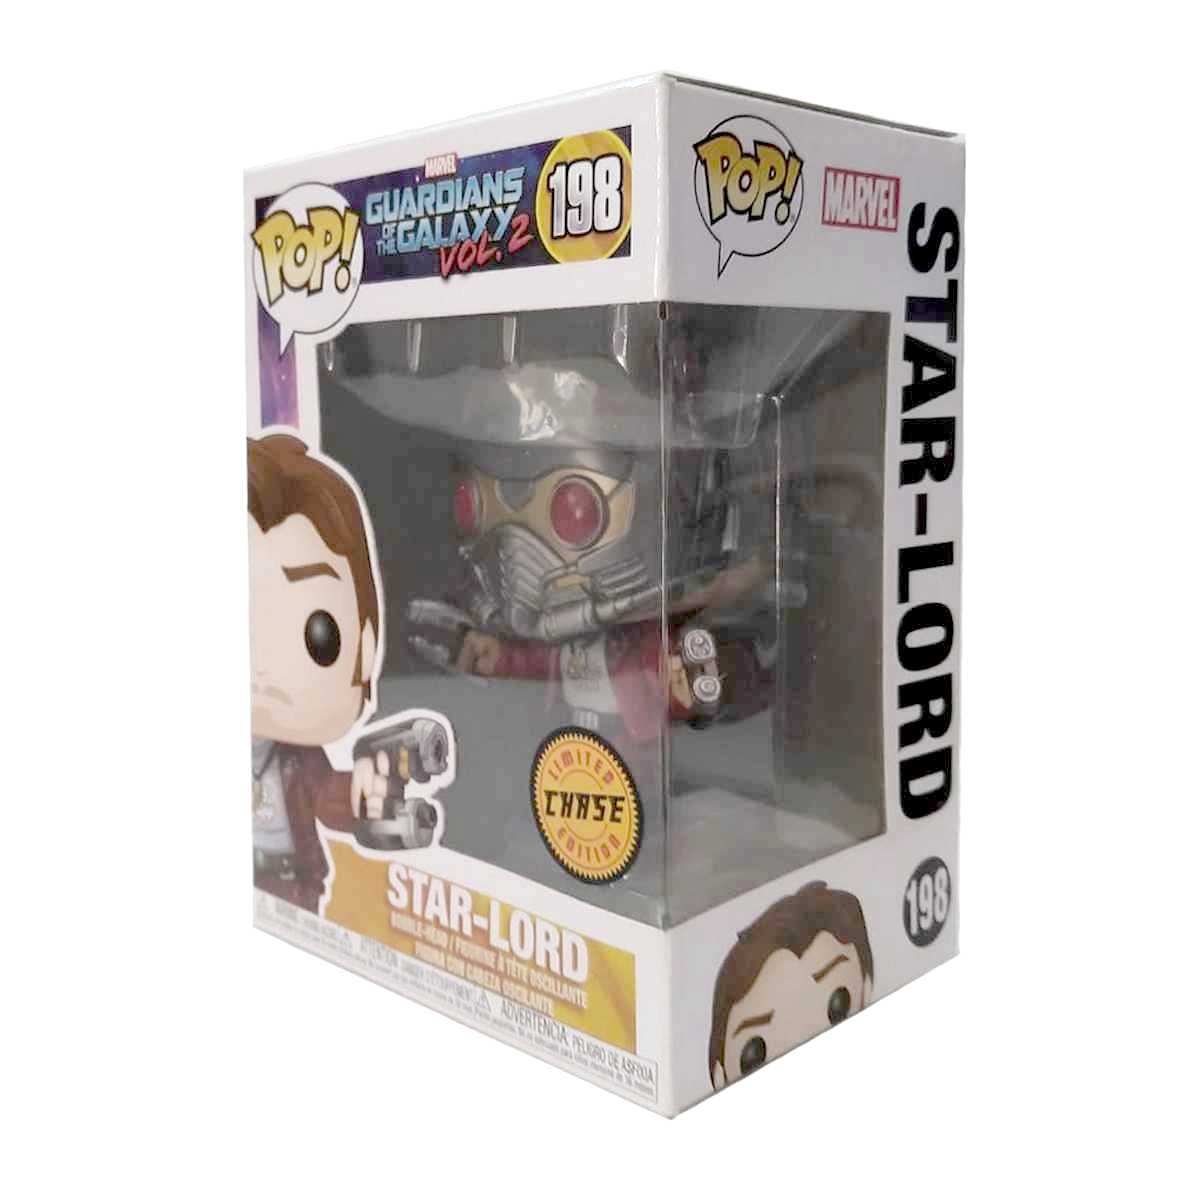 Funko Pop! Marvel Guardians of The Galaxy vol. 2 Star-Lord CHASE vinyl figure número 198